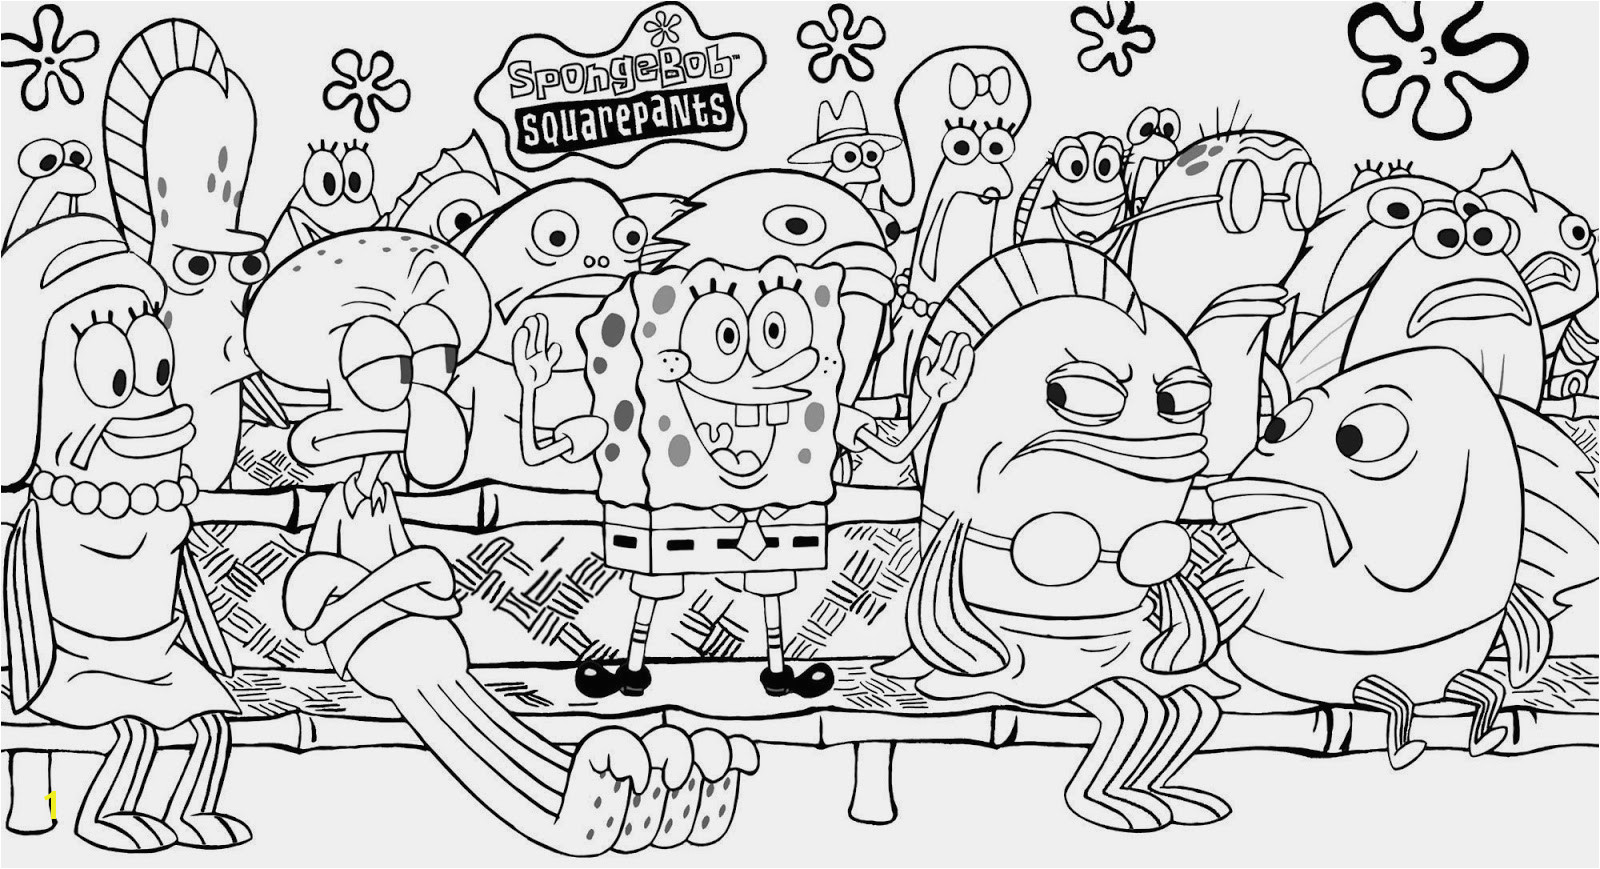 Free Coloring Pages for Kids top Free Printable Best Free Coloring Pages Spongebob Squarepants Luxury Luxury